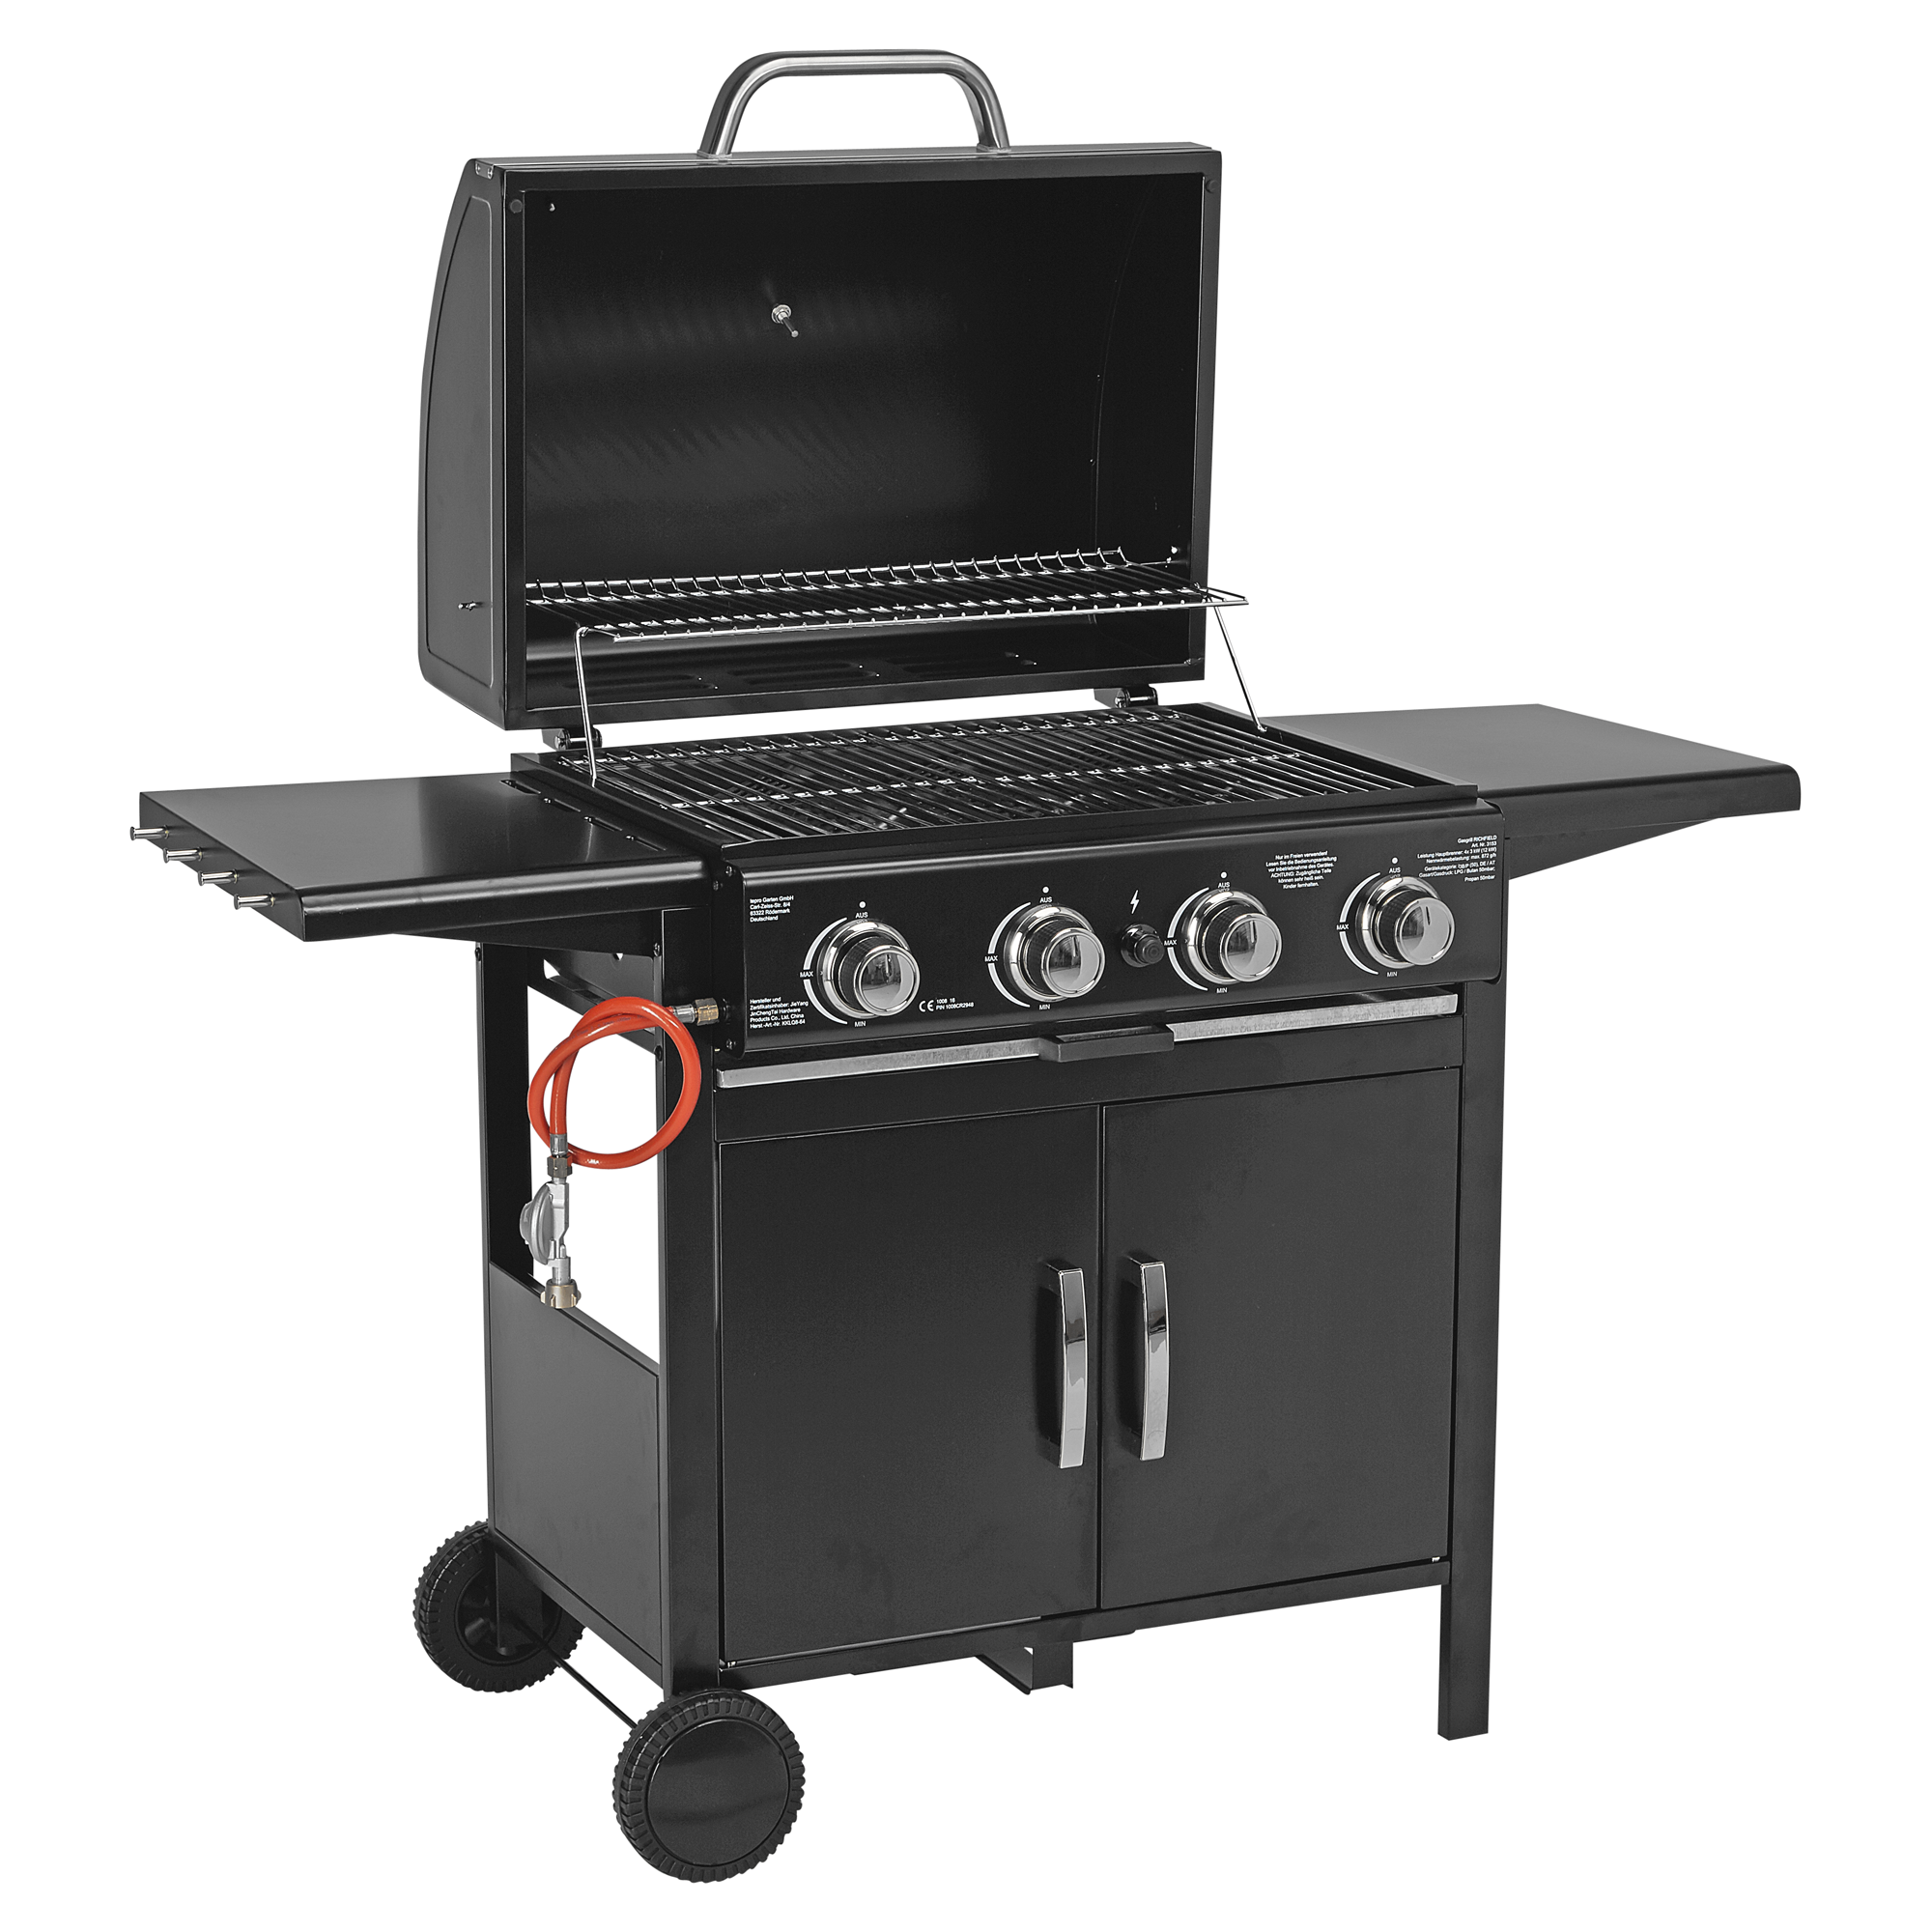 Gasgrill "Richfield" Metall schwarz 4 x 3 kW 58 x 44 cm + product picture